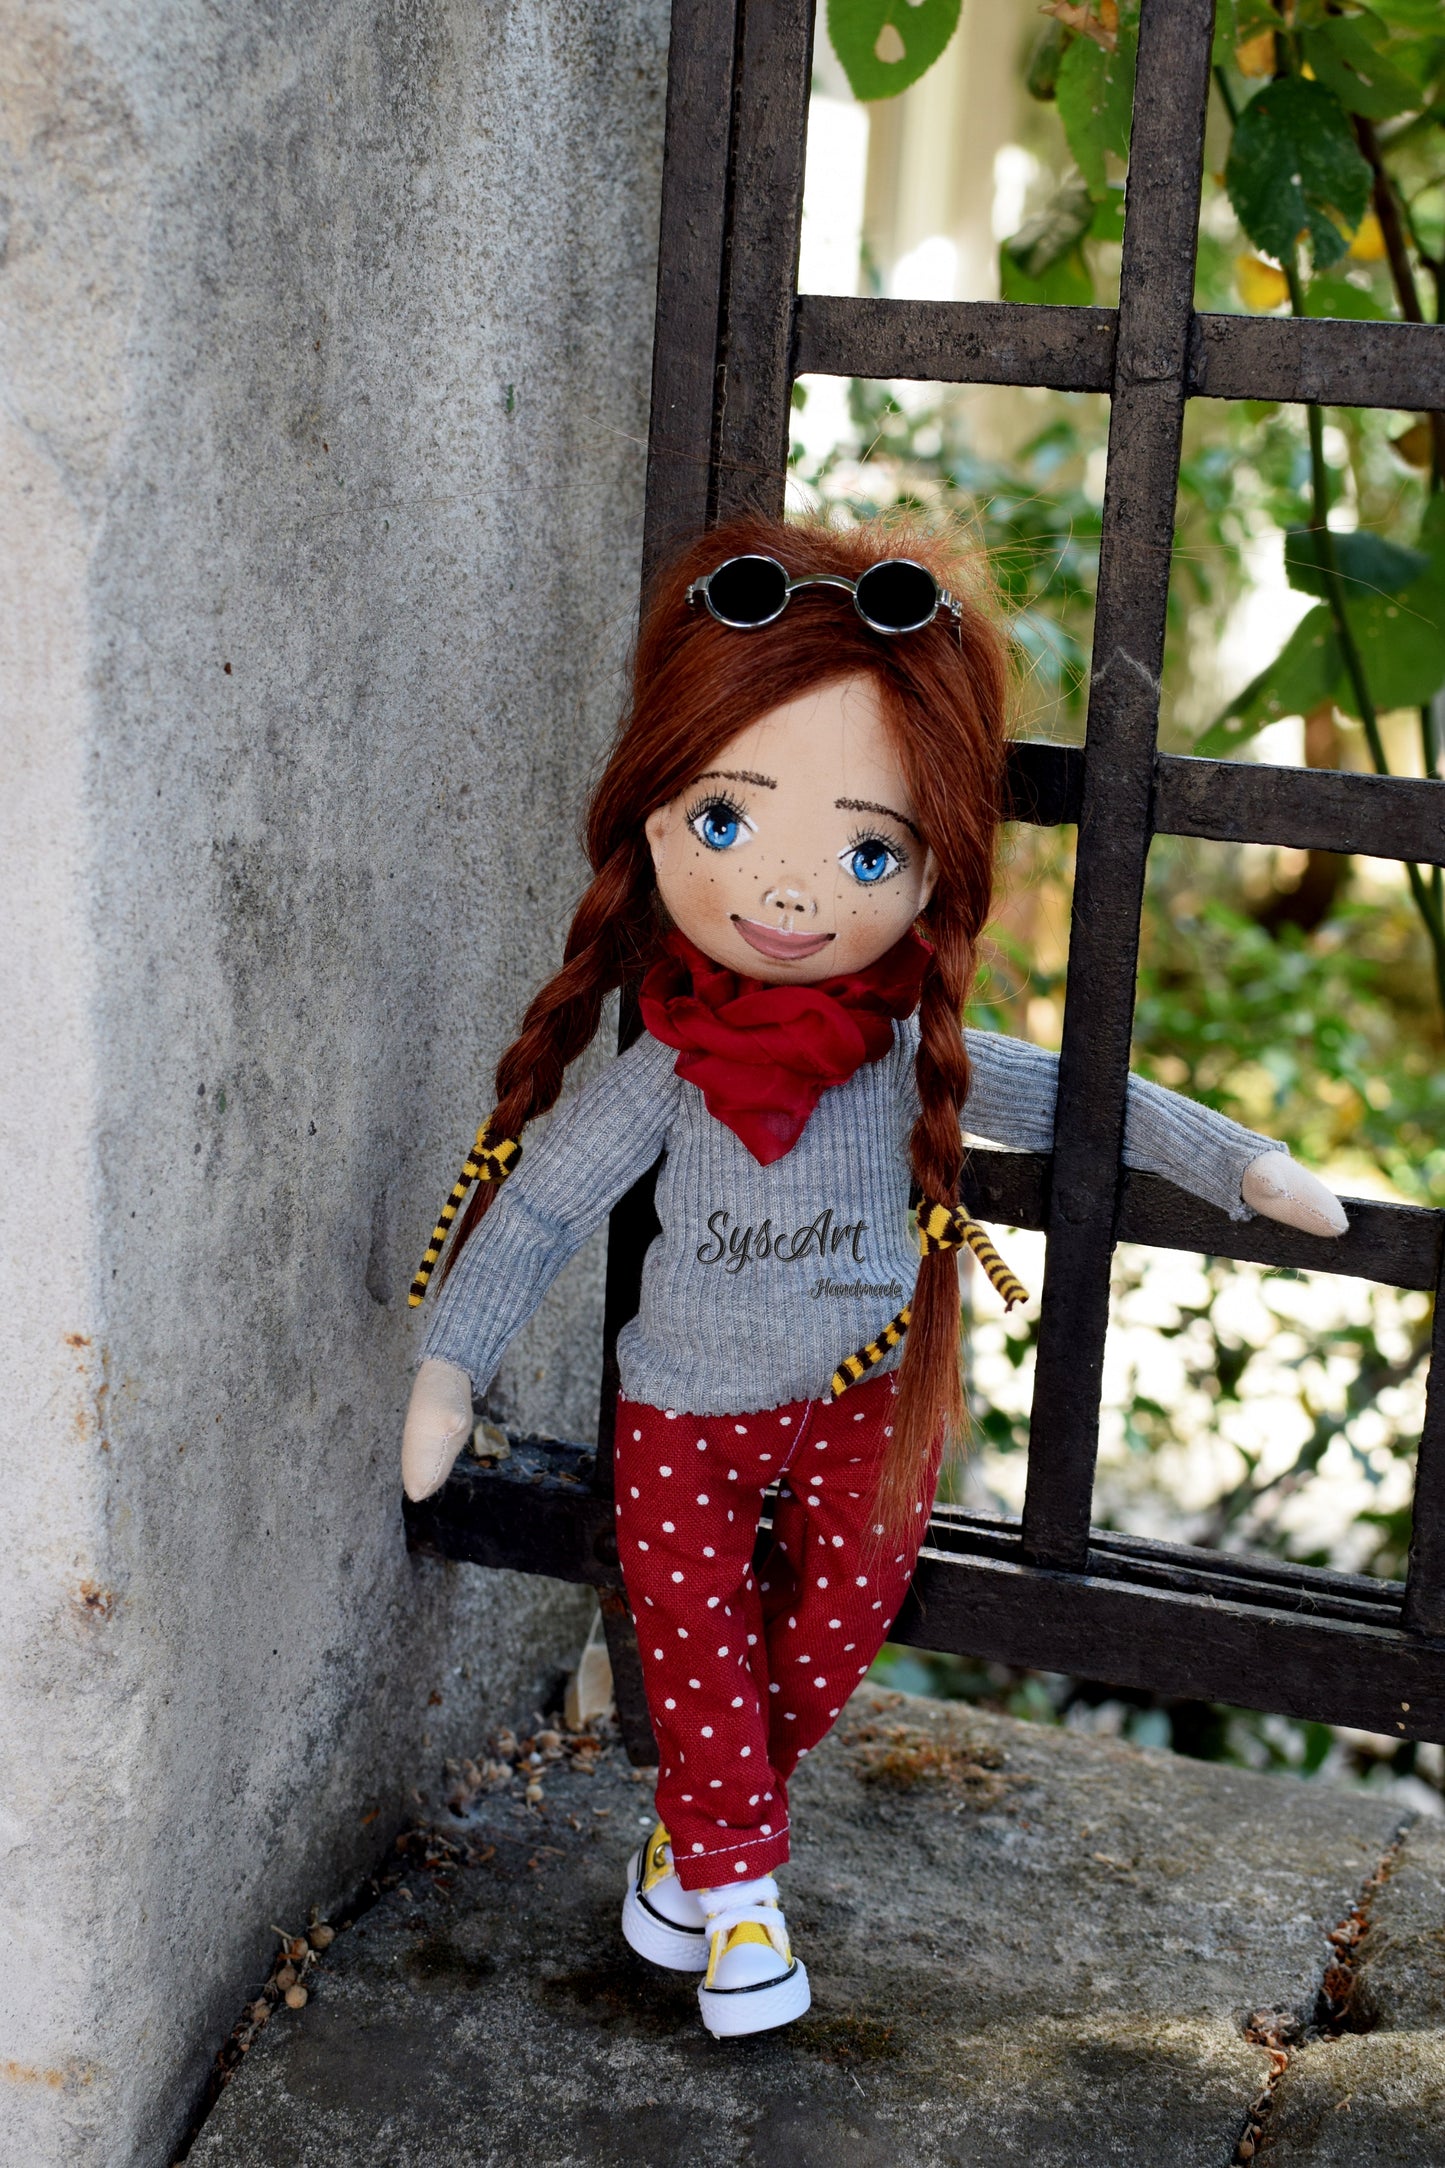 A unique personalized doll in your likeness